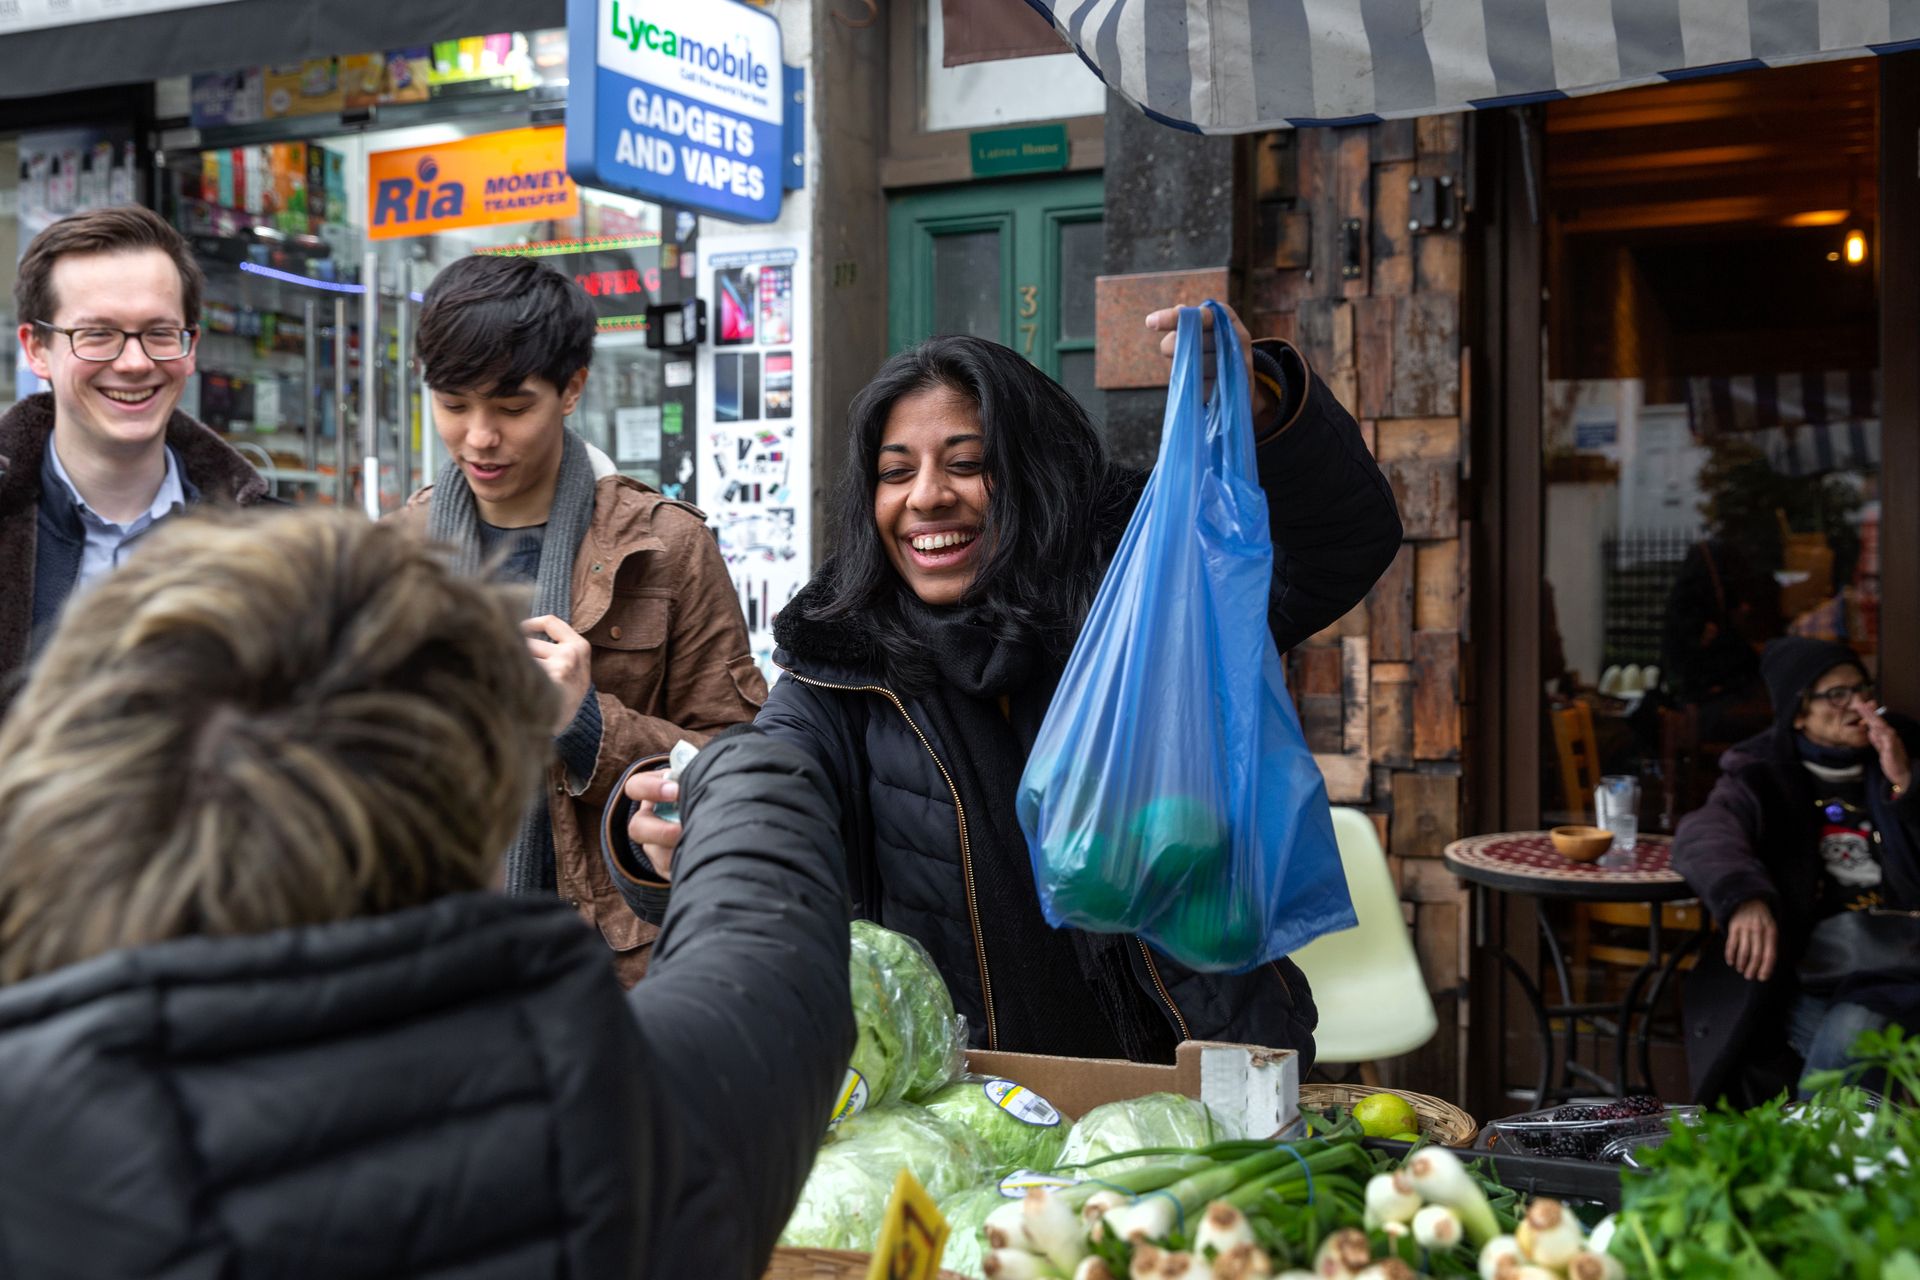 Imperial student Aishy buying fruit and veg at Fulham market